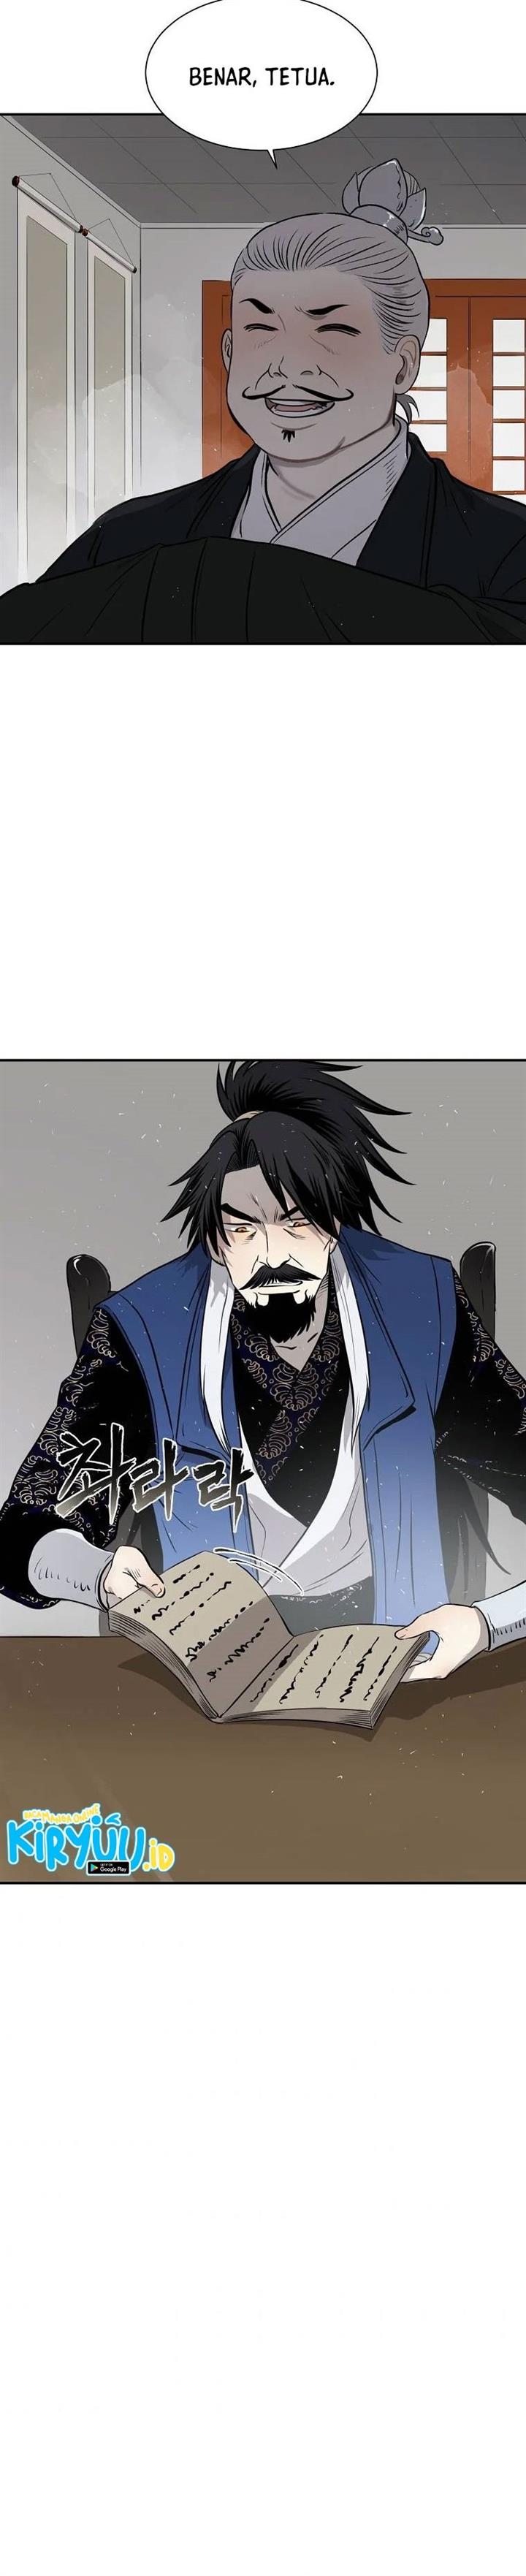 Demon in Mount Hua Chapter 8